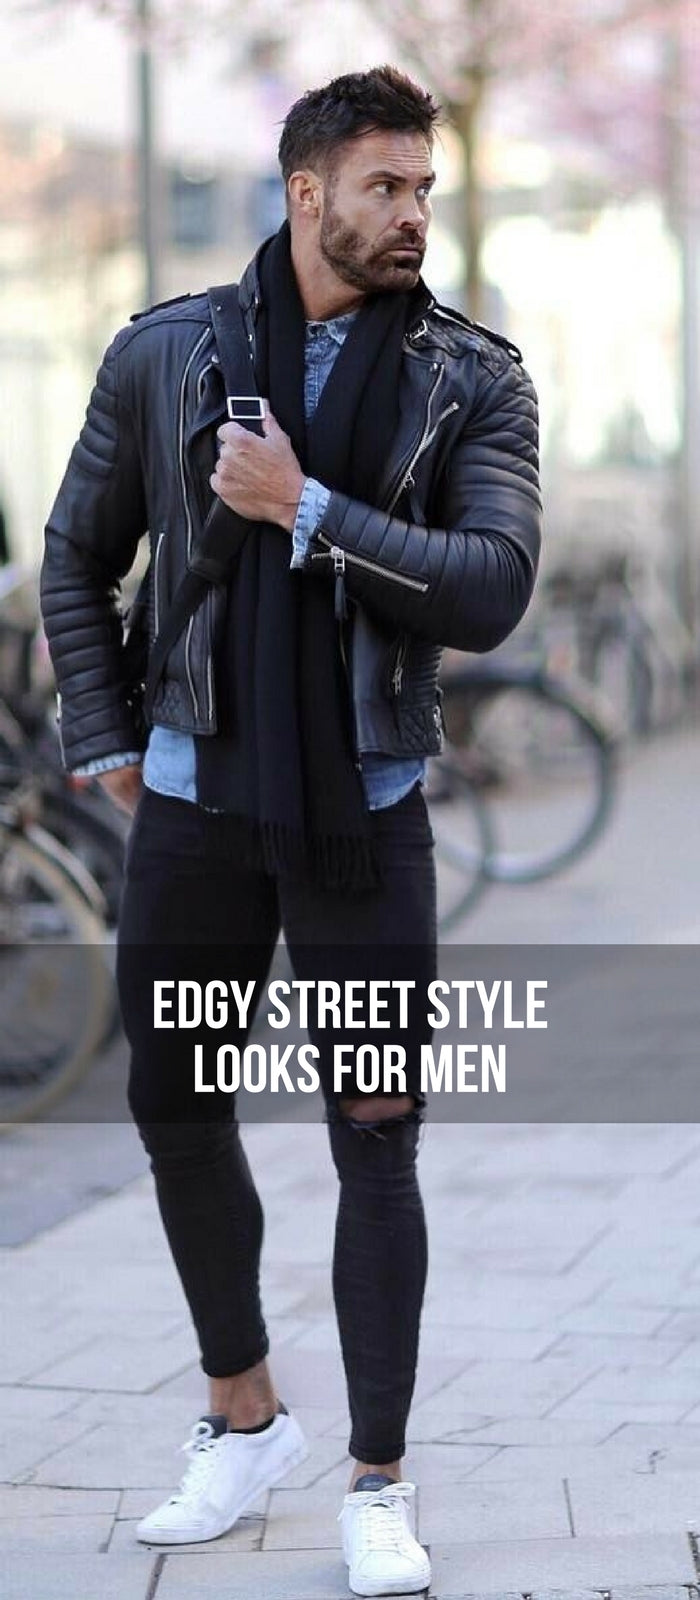 16 Edgy Street Style Looks To Help You Dress Sharp Lifestyle By Ps